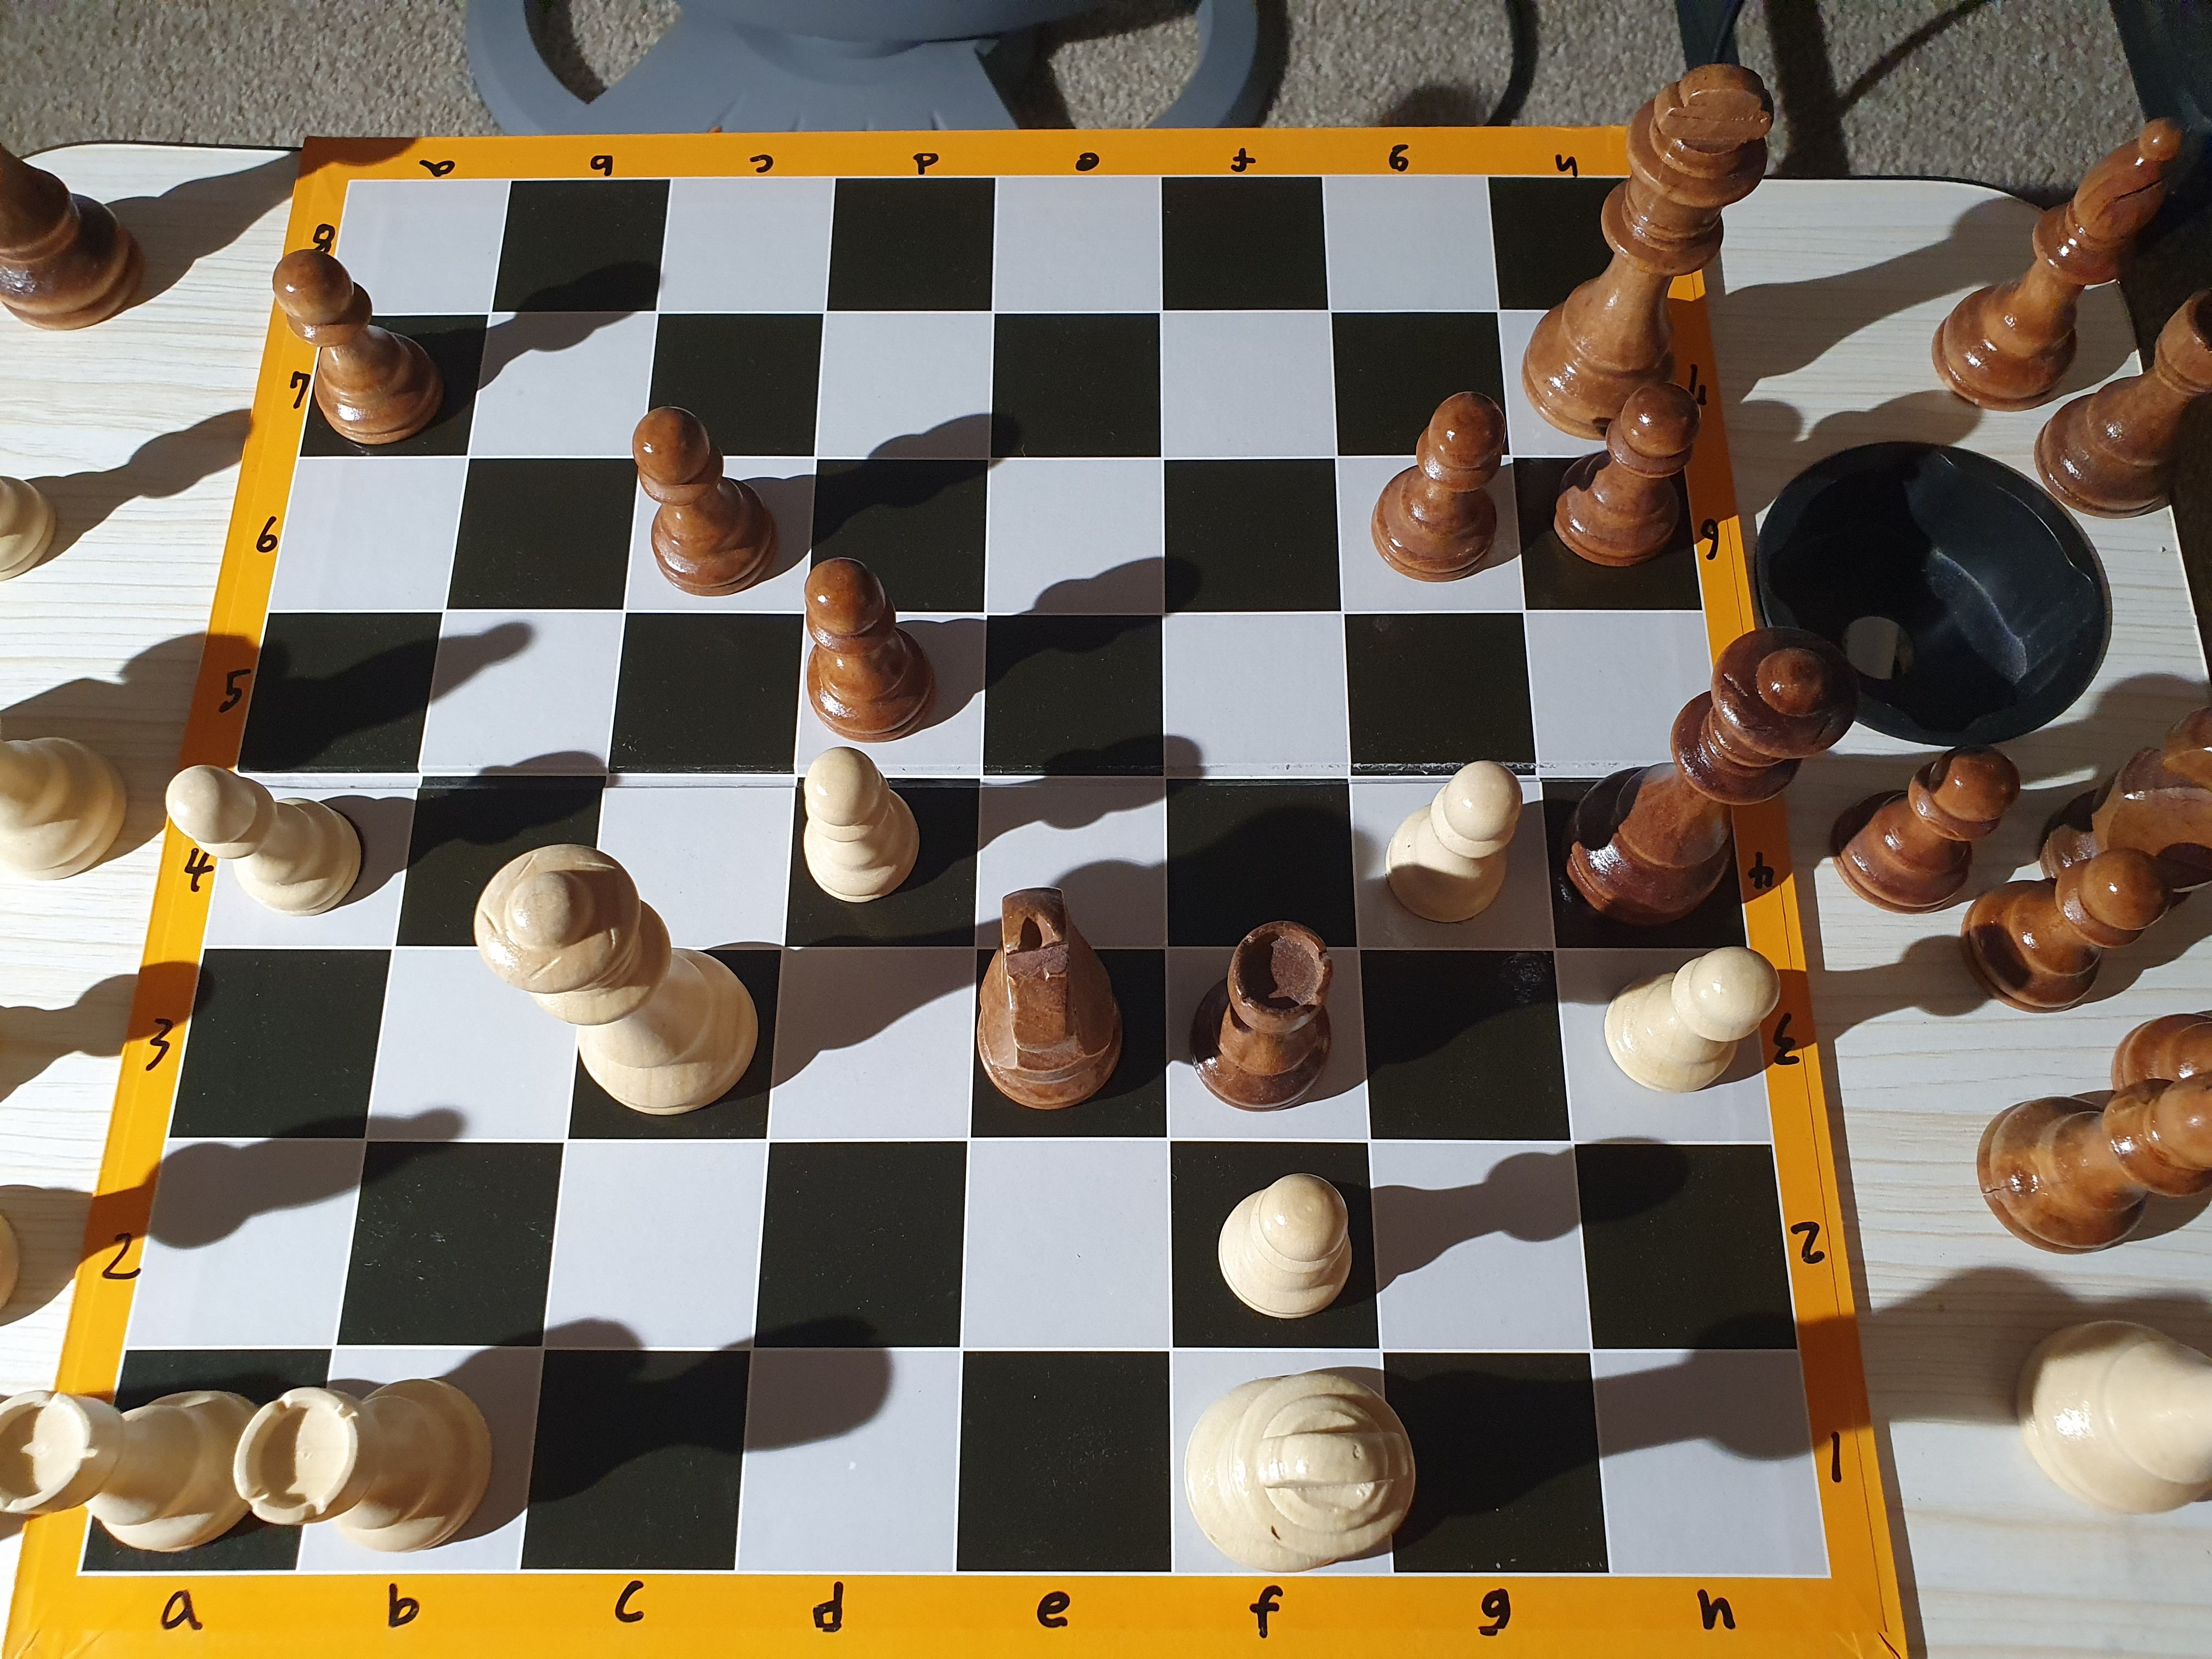 Excellent checkmates vs. best move checkmates - Chess Forums